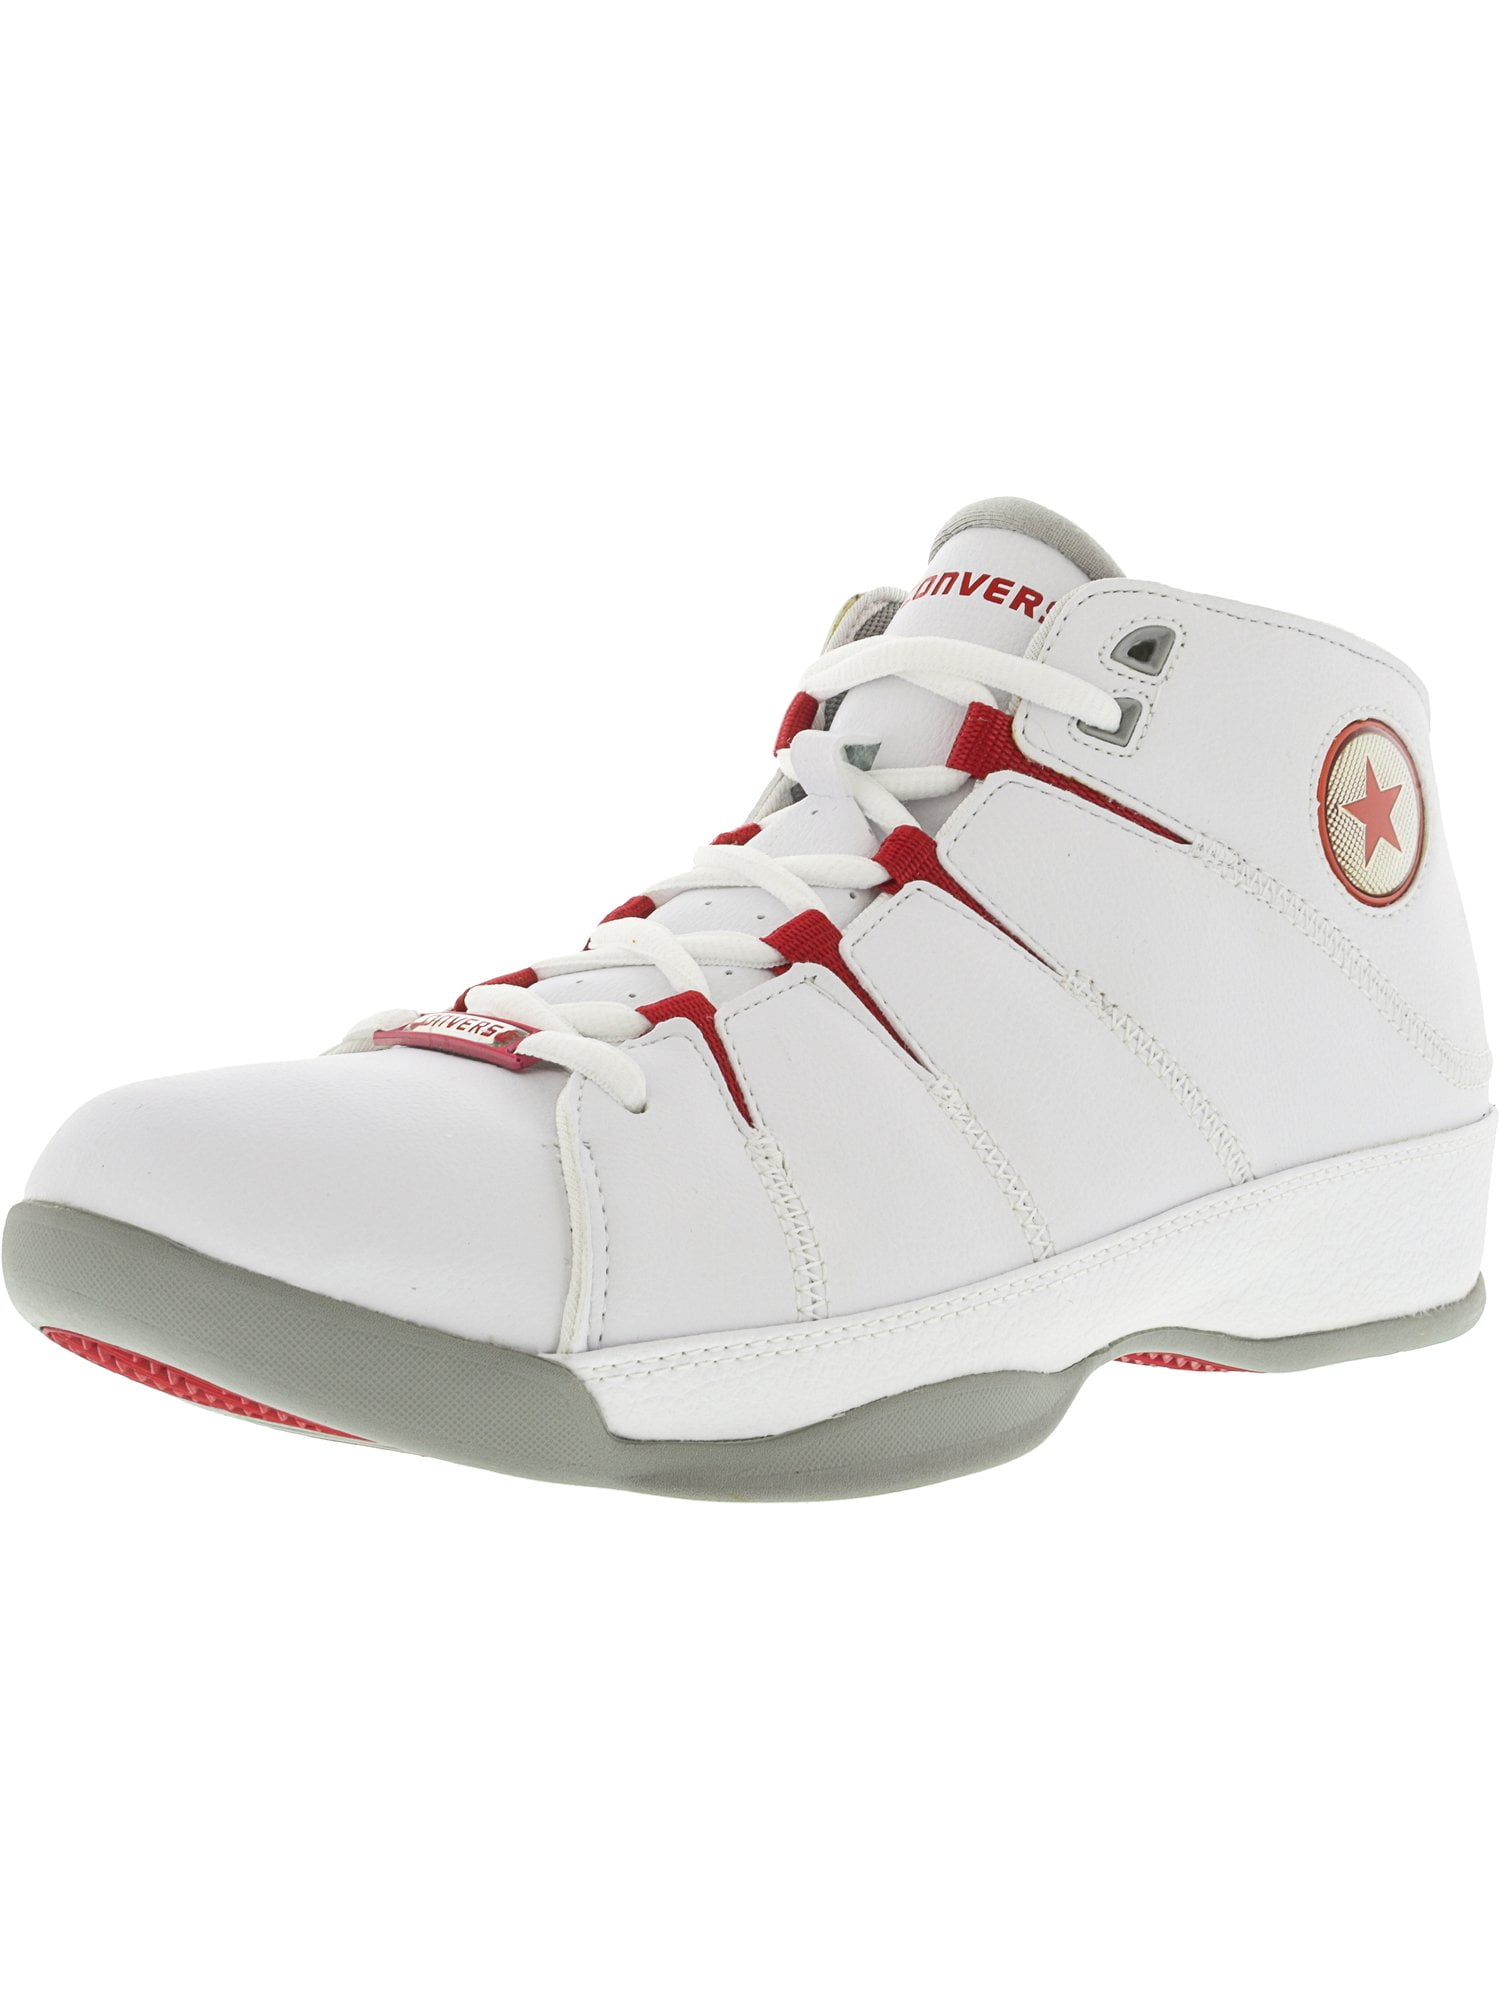 white leather basketball shoes